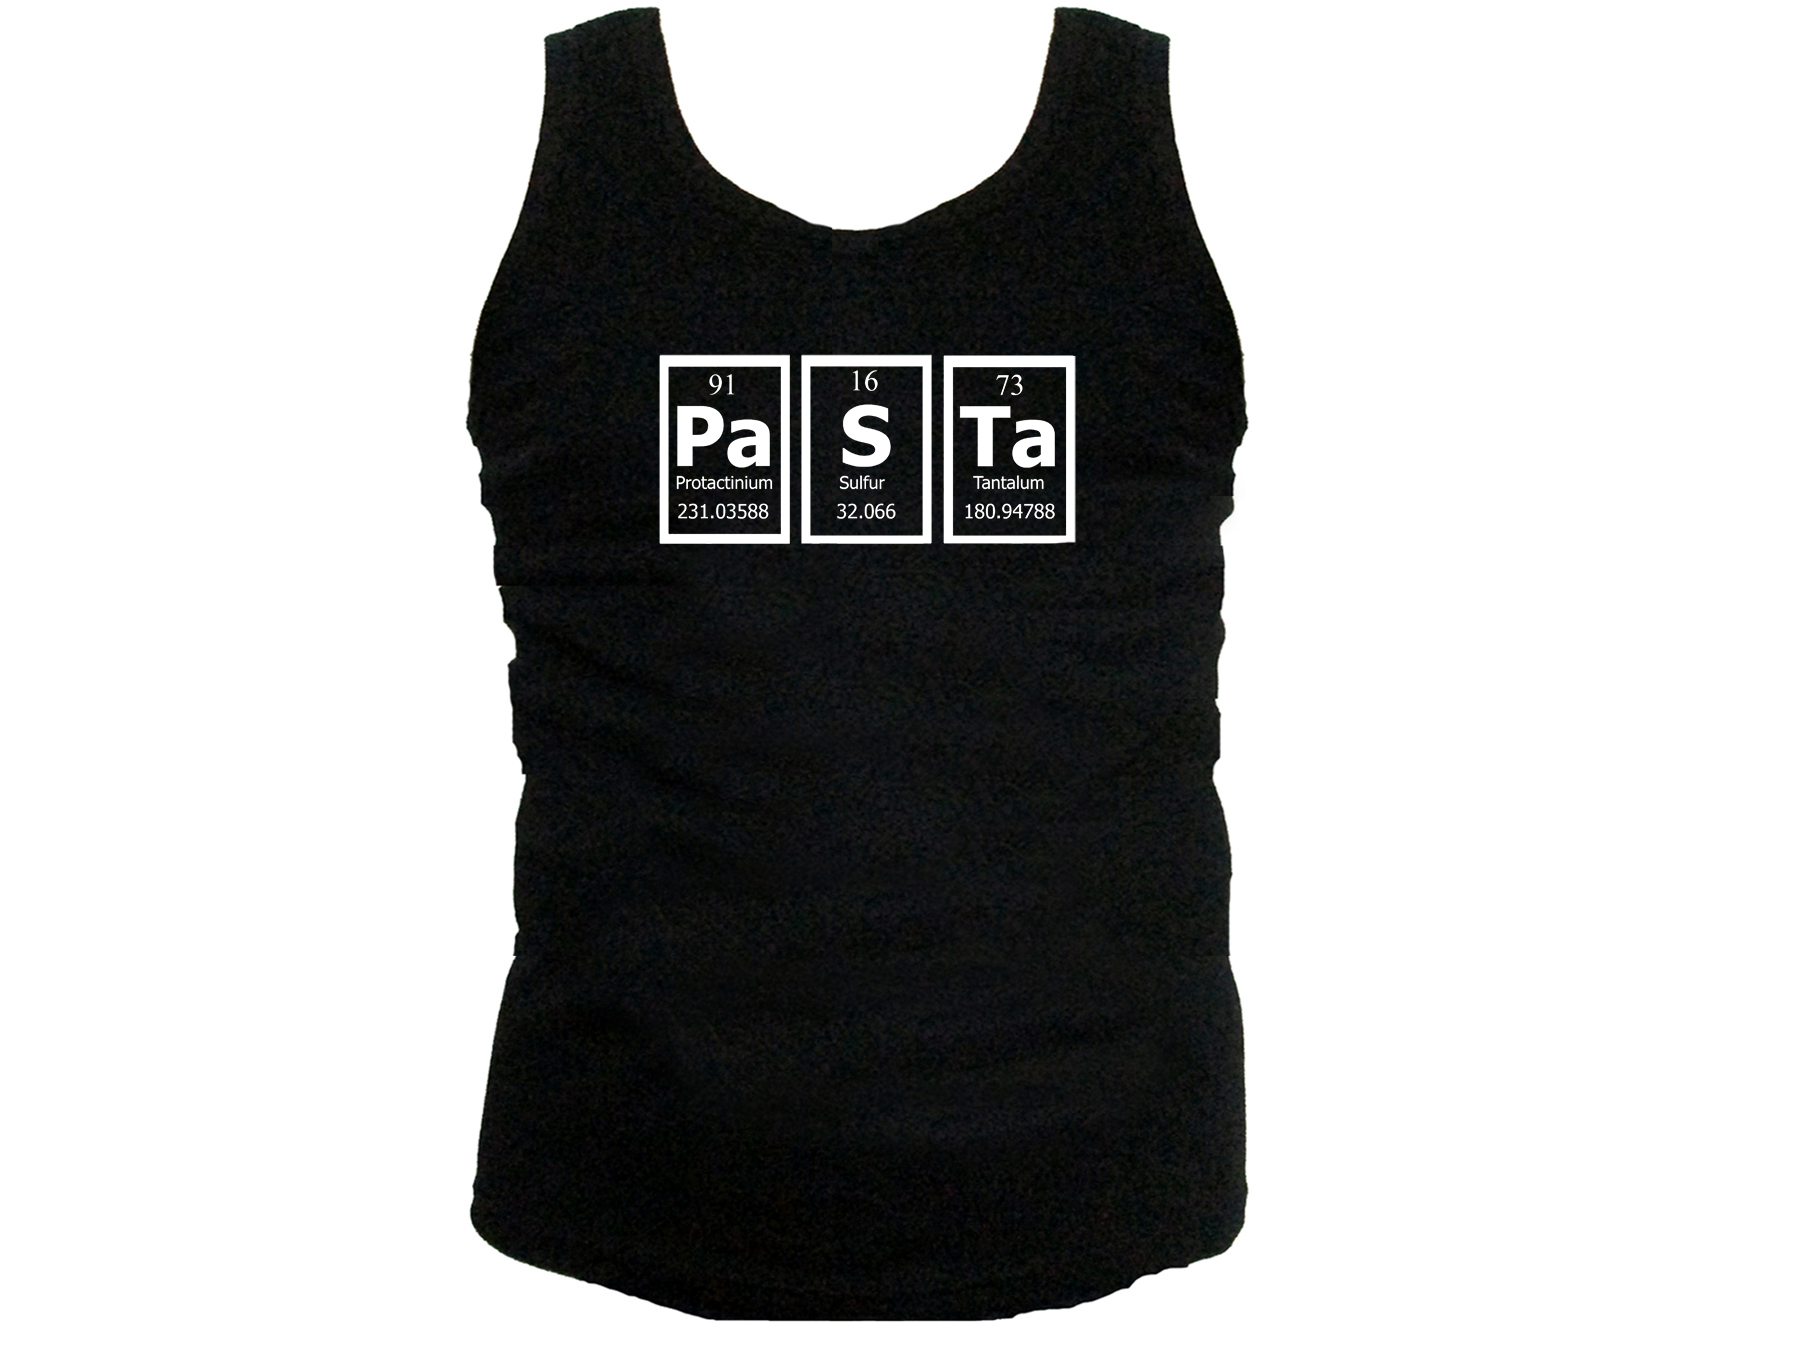 Pasta periodic table of elements nerdy food funny tank top